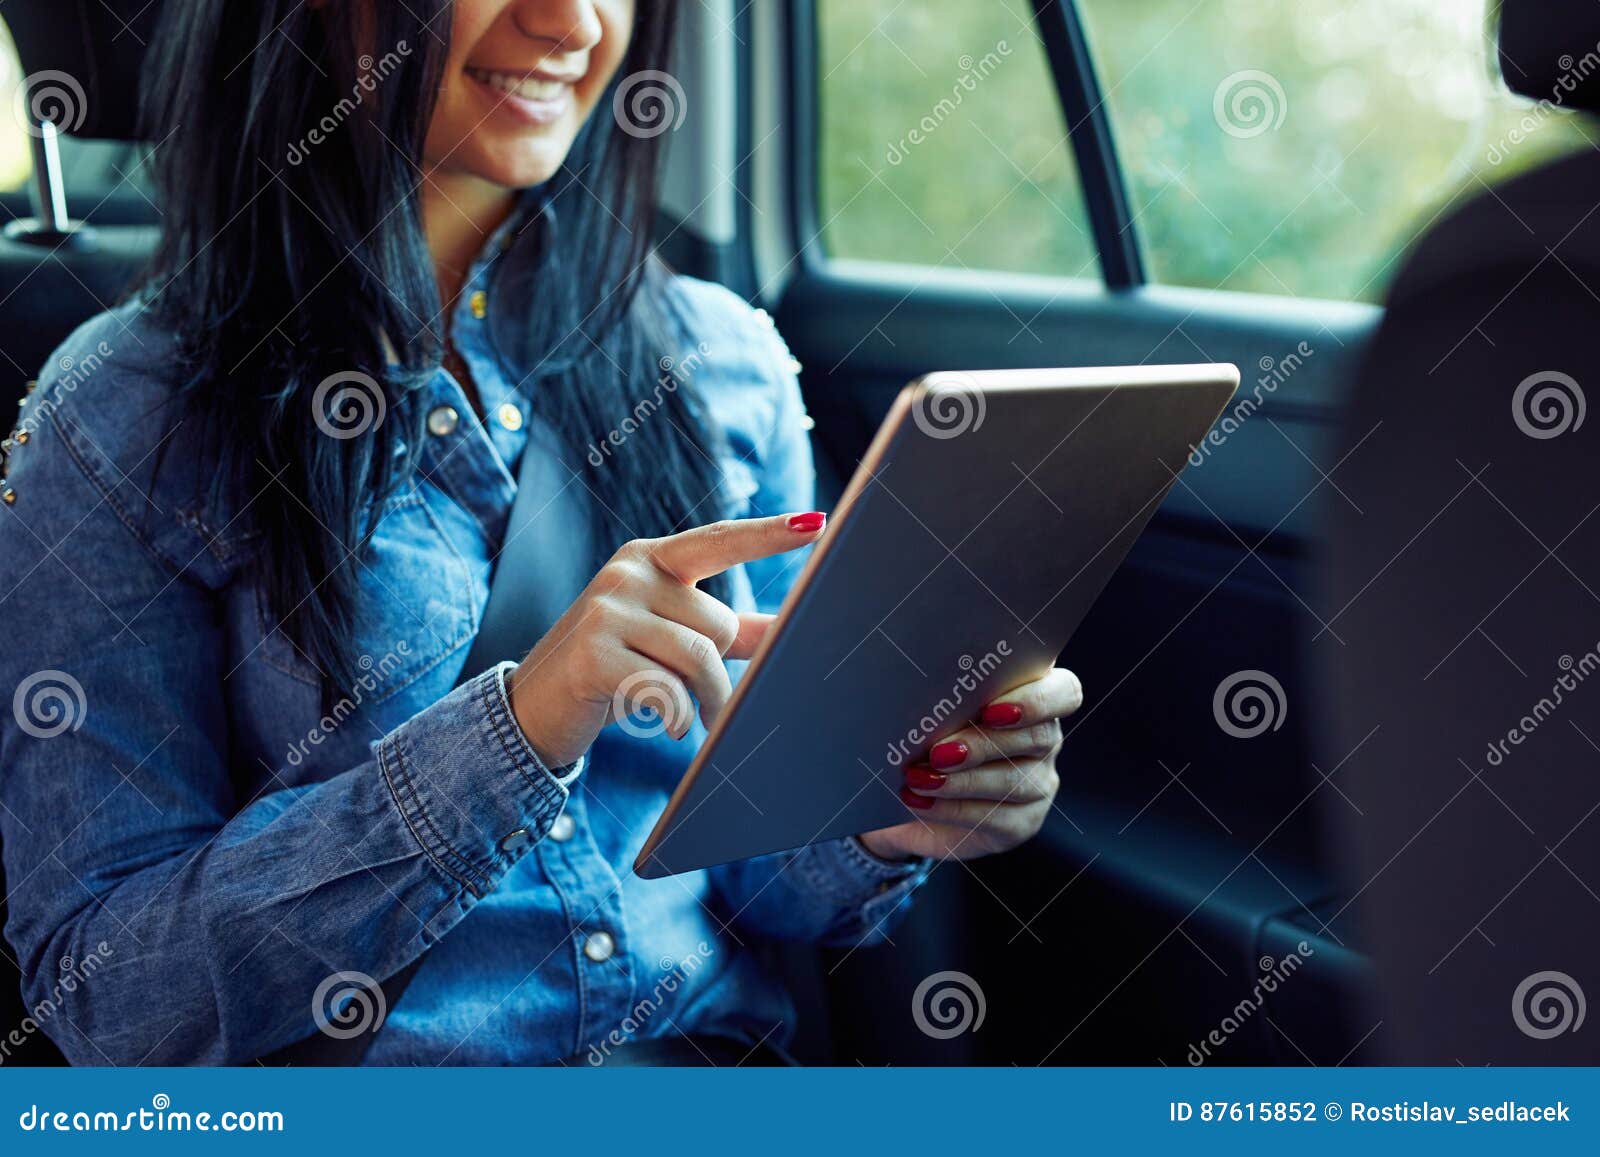 Woman Sitting In A Car With Tablet Computer Stock Photo - Image of traveling, people: 87615852 - 웹